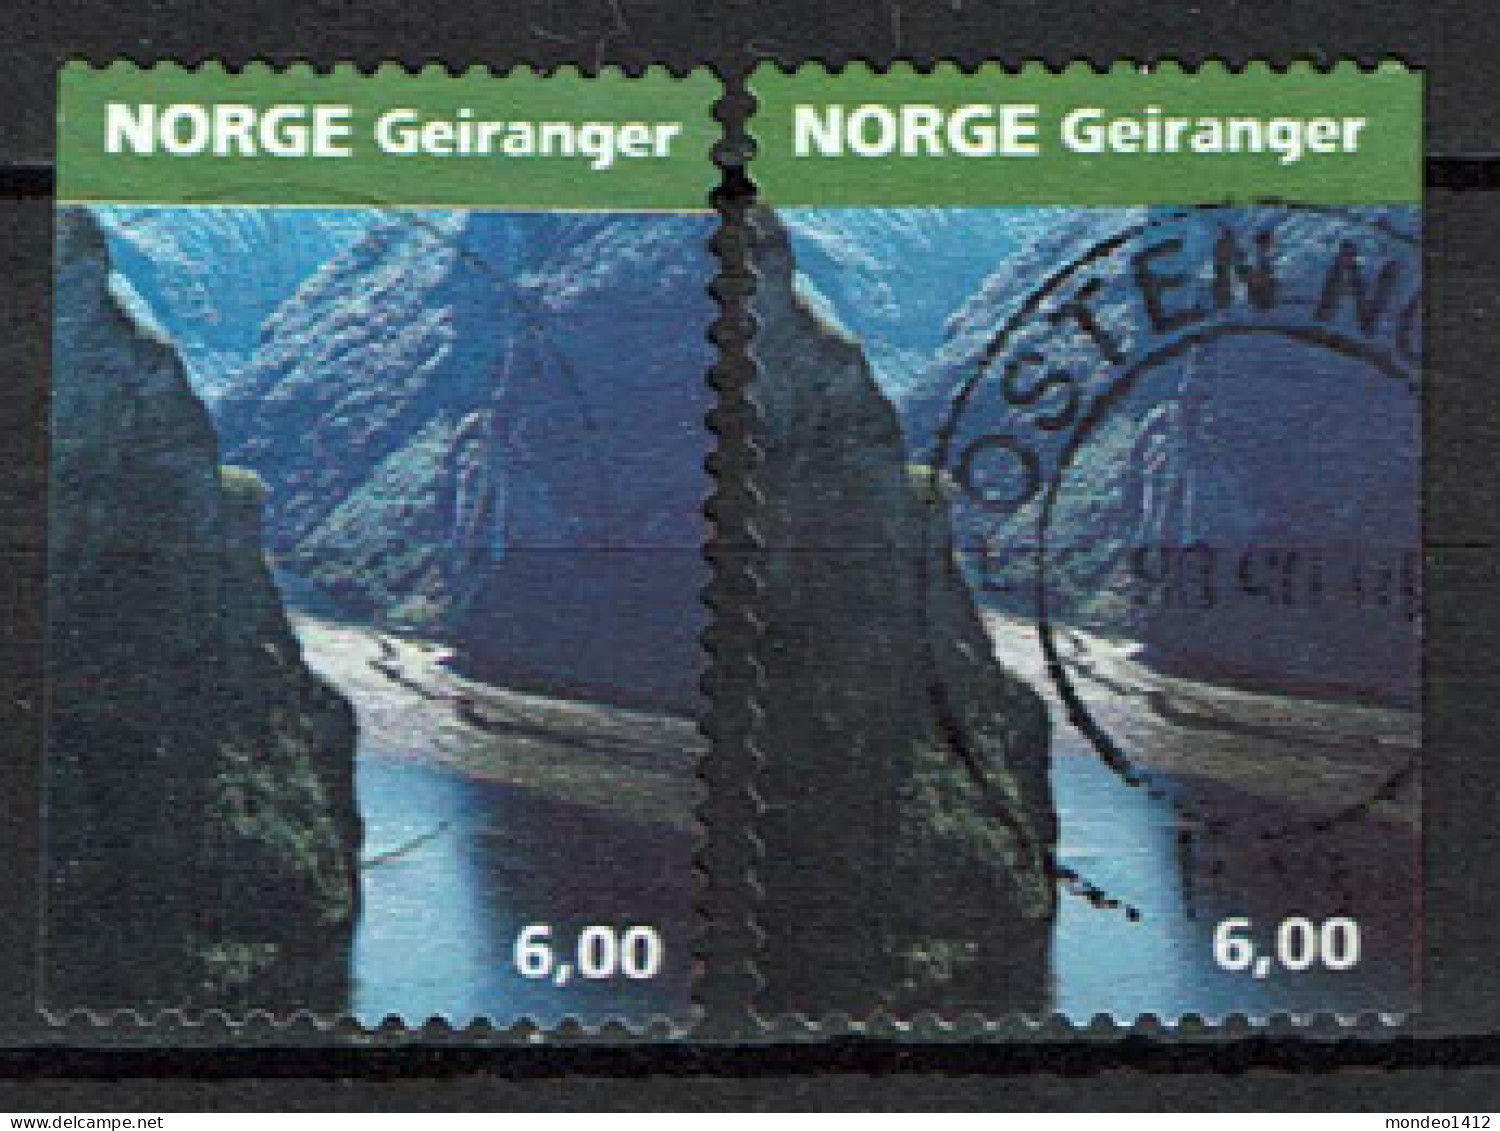 Norway 2005 - Yv.1474 Mi.1531 Dl 1531 Dr - Used O - Geiranger Fjord - Used Stamps